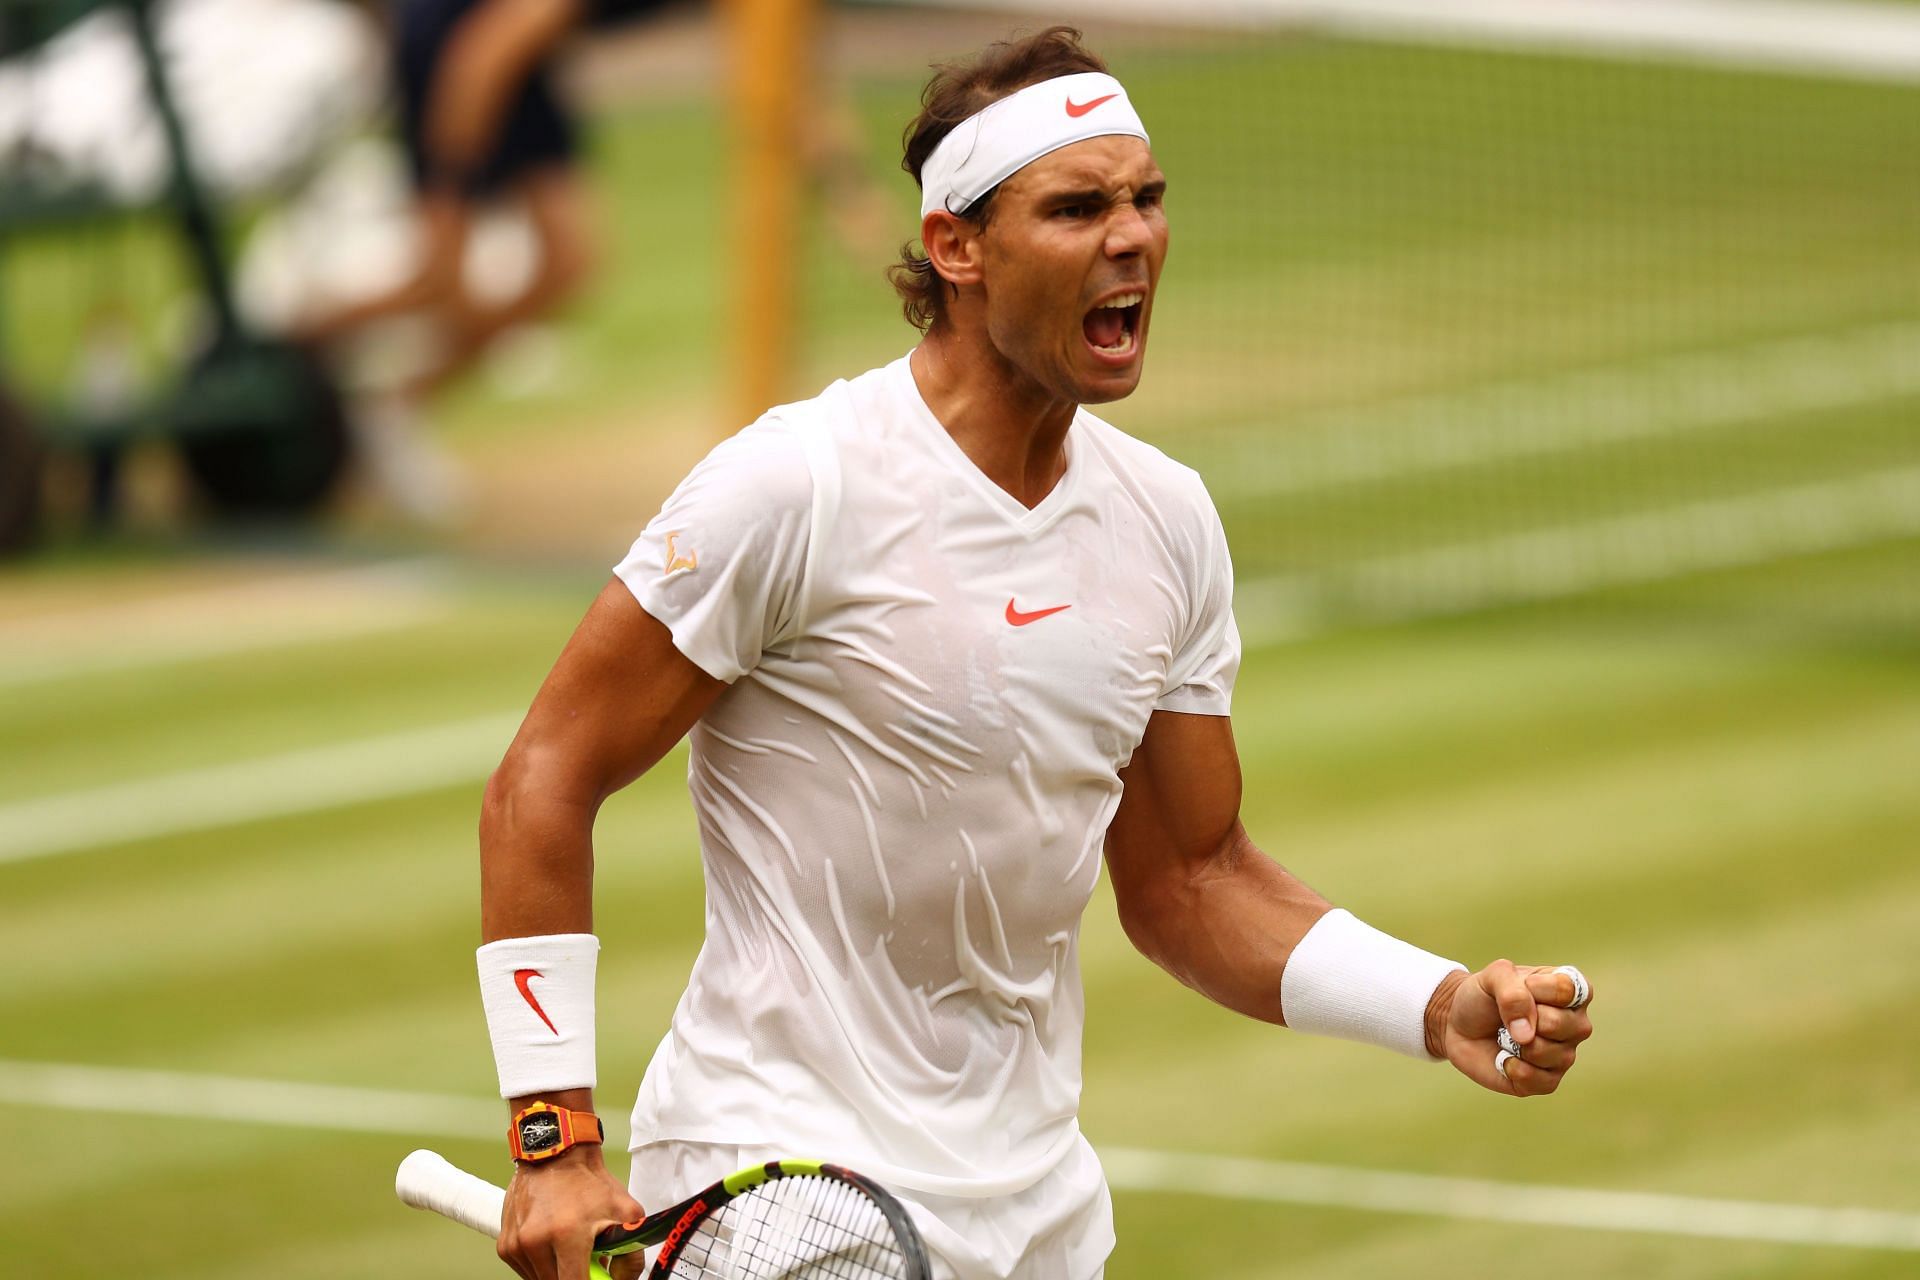 Whether Rafael Nadal will be fit in time for Wimbledon this year remains to be seen